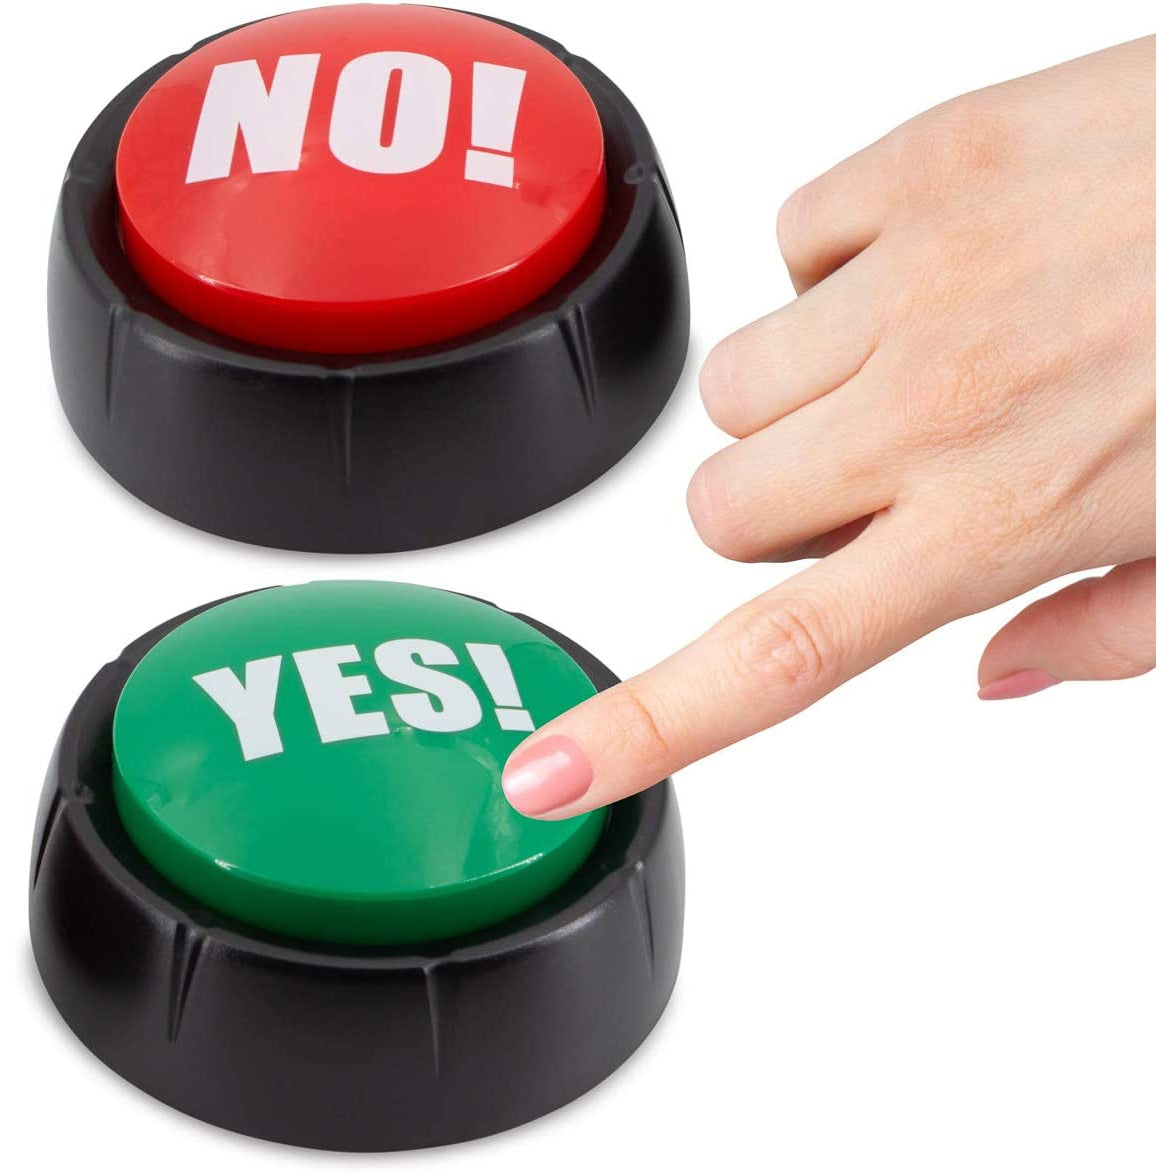 Talking Yes & No Buzzer Buttons-Your Private Bar